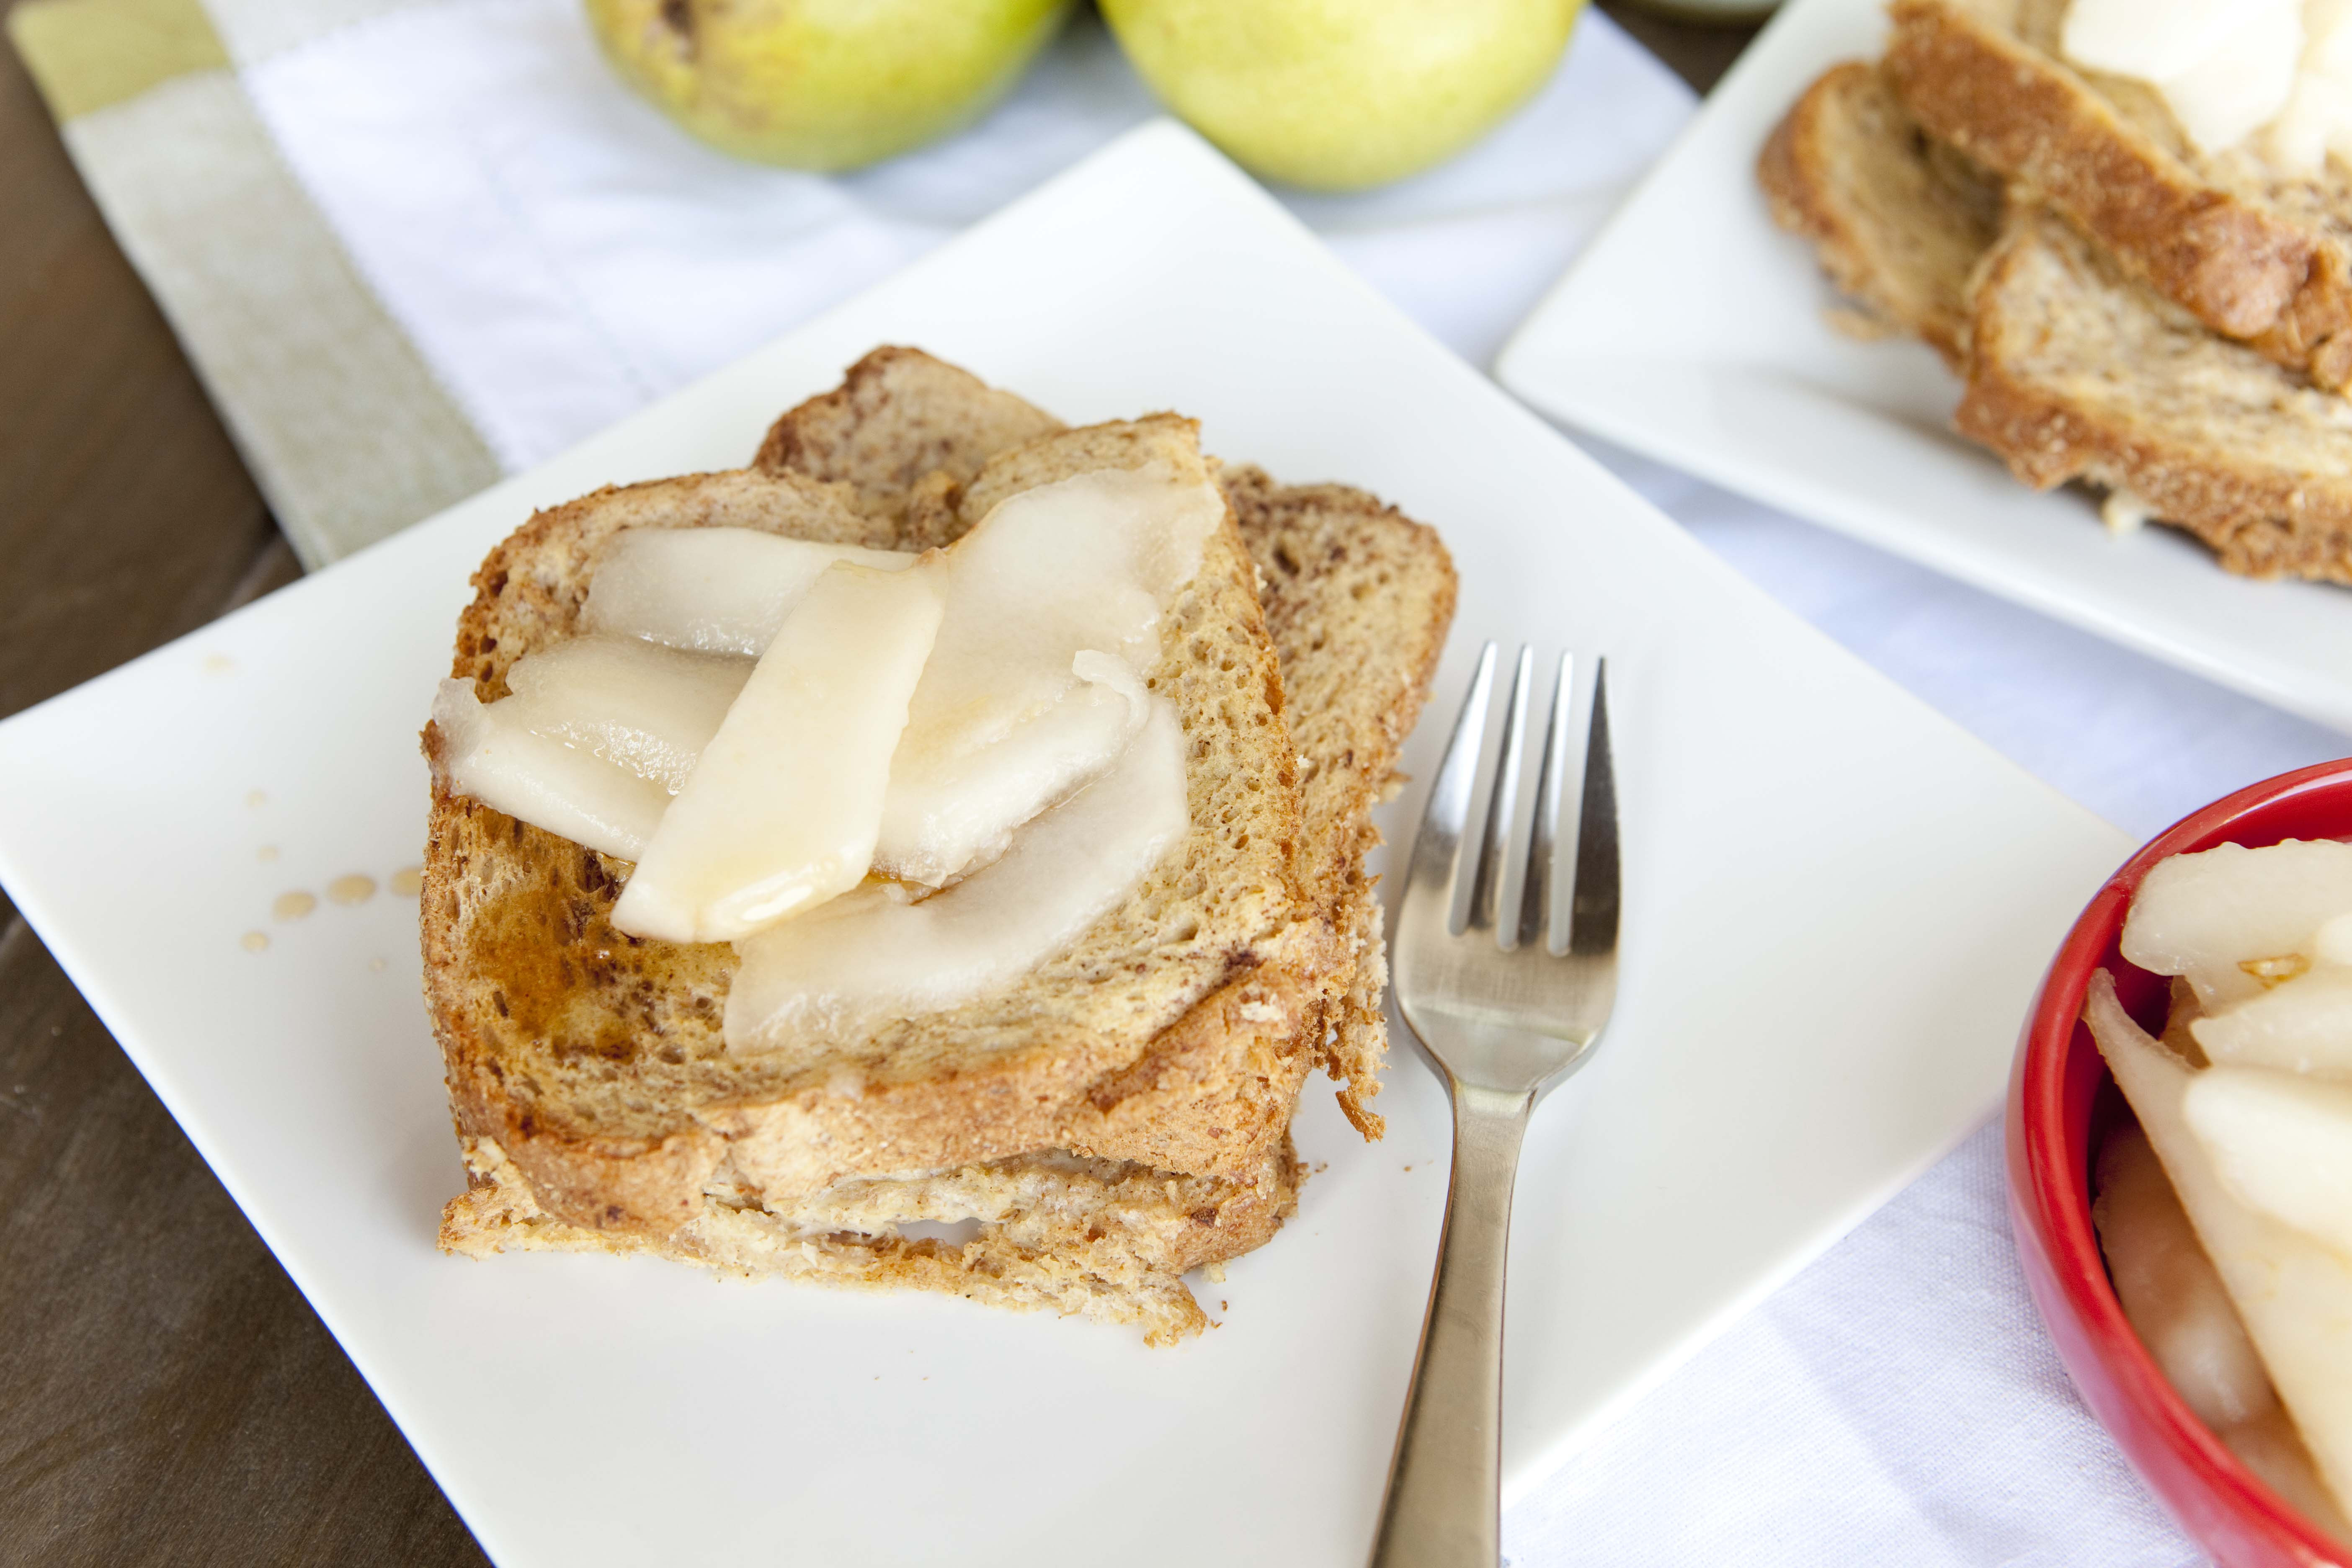 Healthy Baked French Toast
 Warm Pears & Baked French Toast